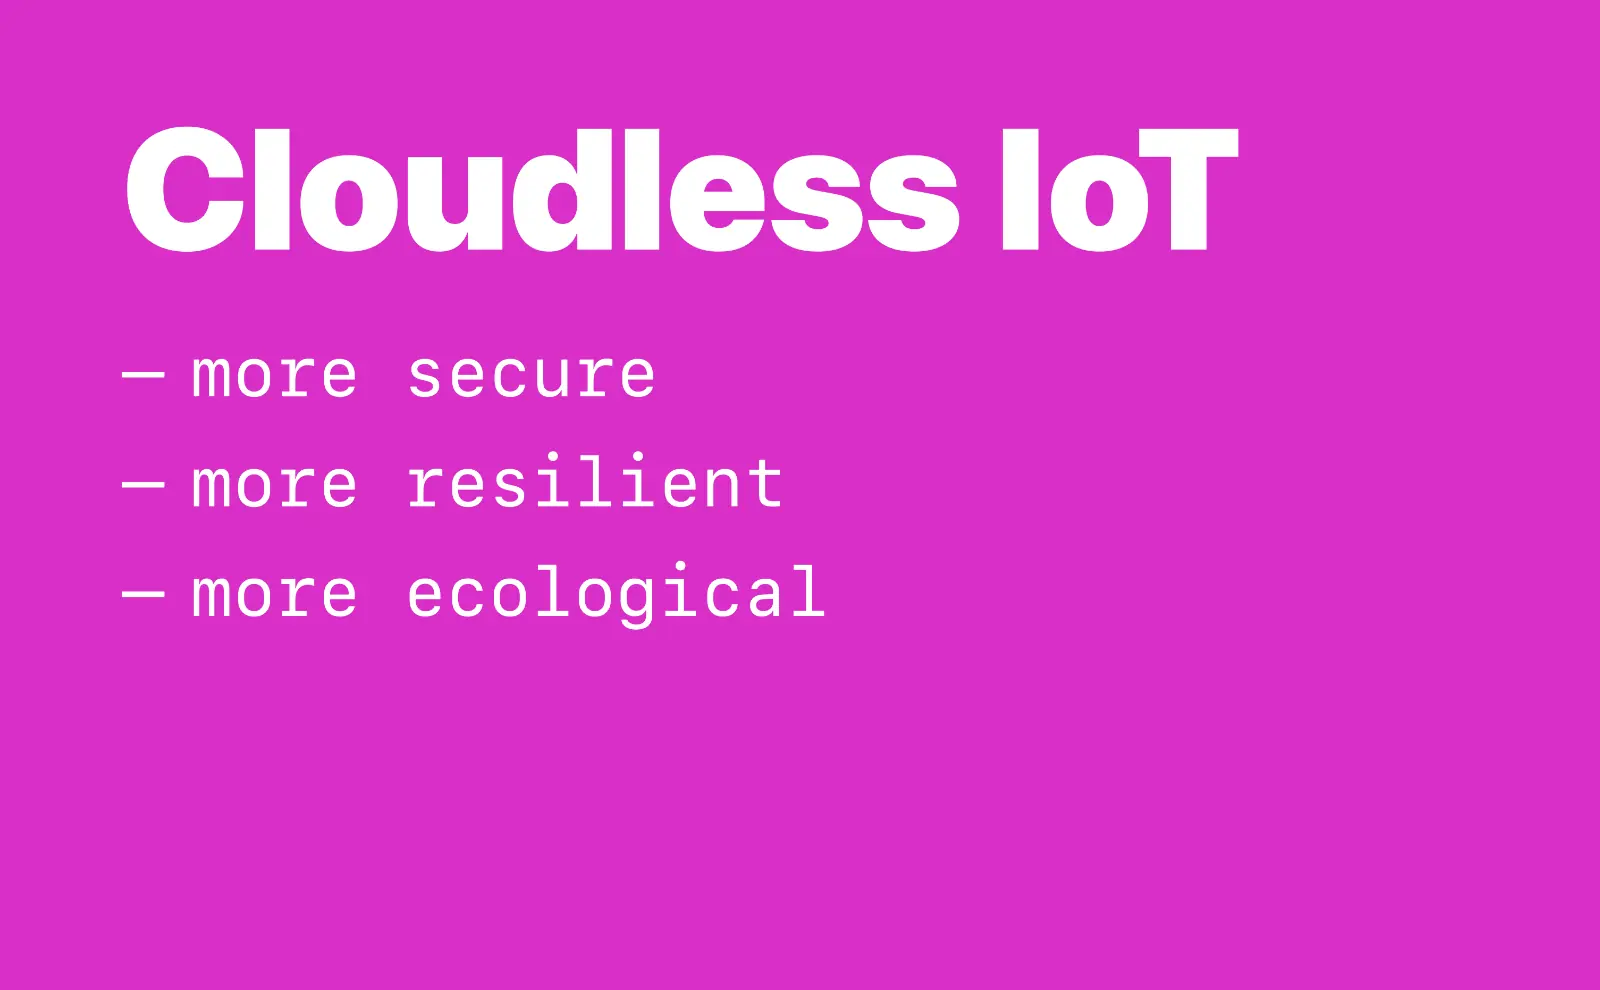 Cloudless IoT: more secure, more resilient, more ecological